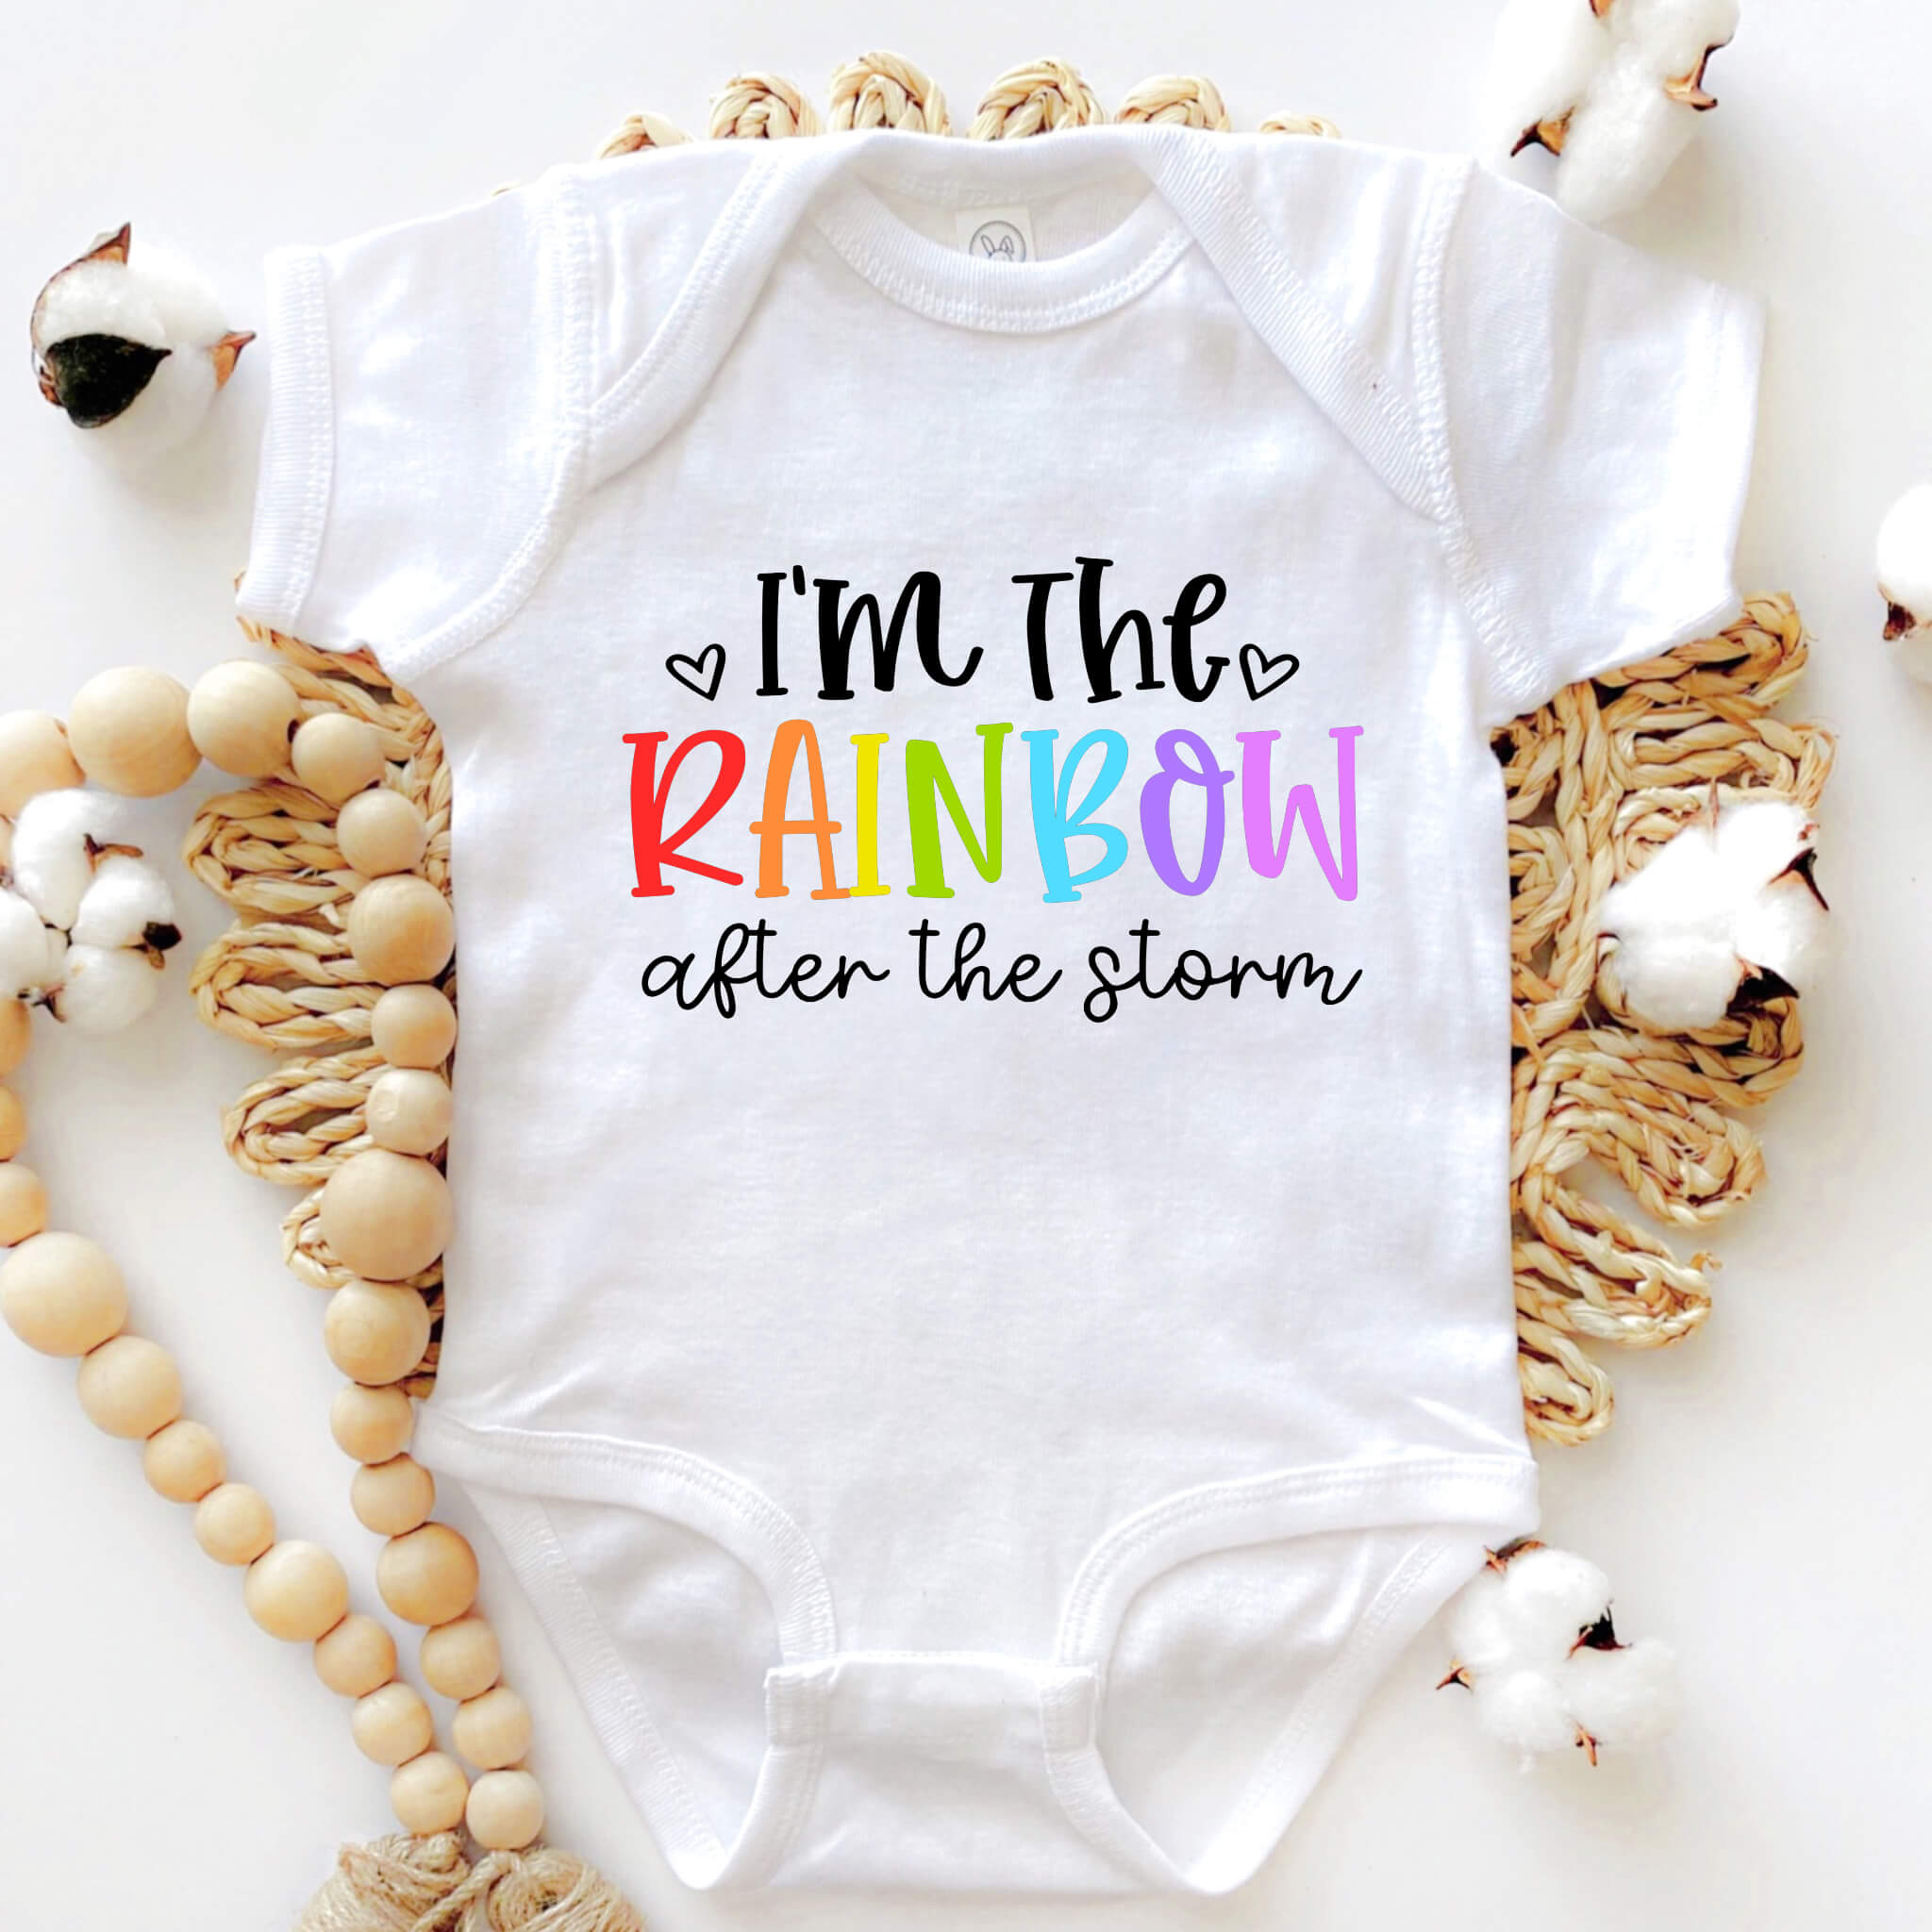 New Baby Onesie, I’m The Rainbow After The Storm, Baby Bodysuit, Boy’s, Girl’s Baby Shower Gift, New Baby Take Home Outfit, Maternity Photo Prop Onesie, Rainbow Baby Onesie Outfit